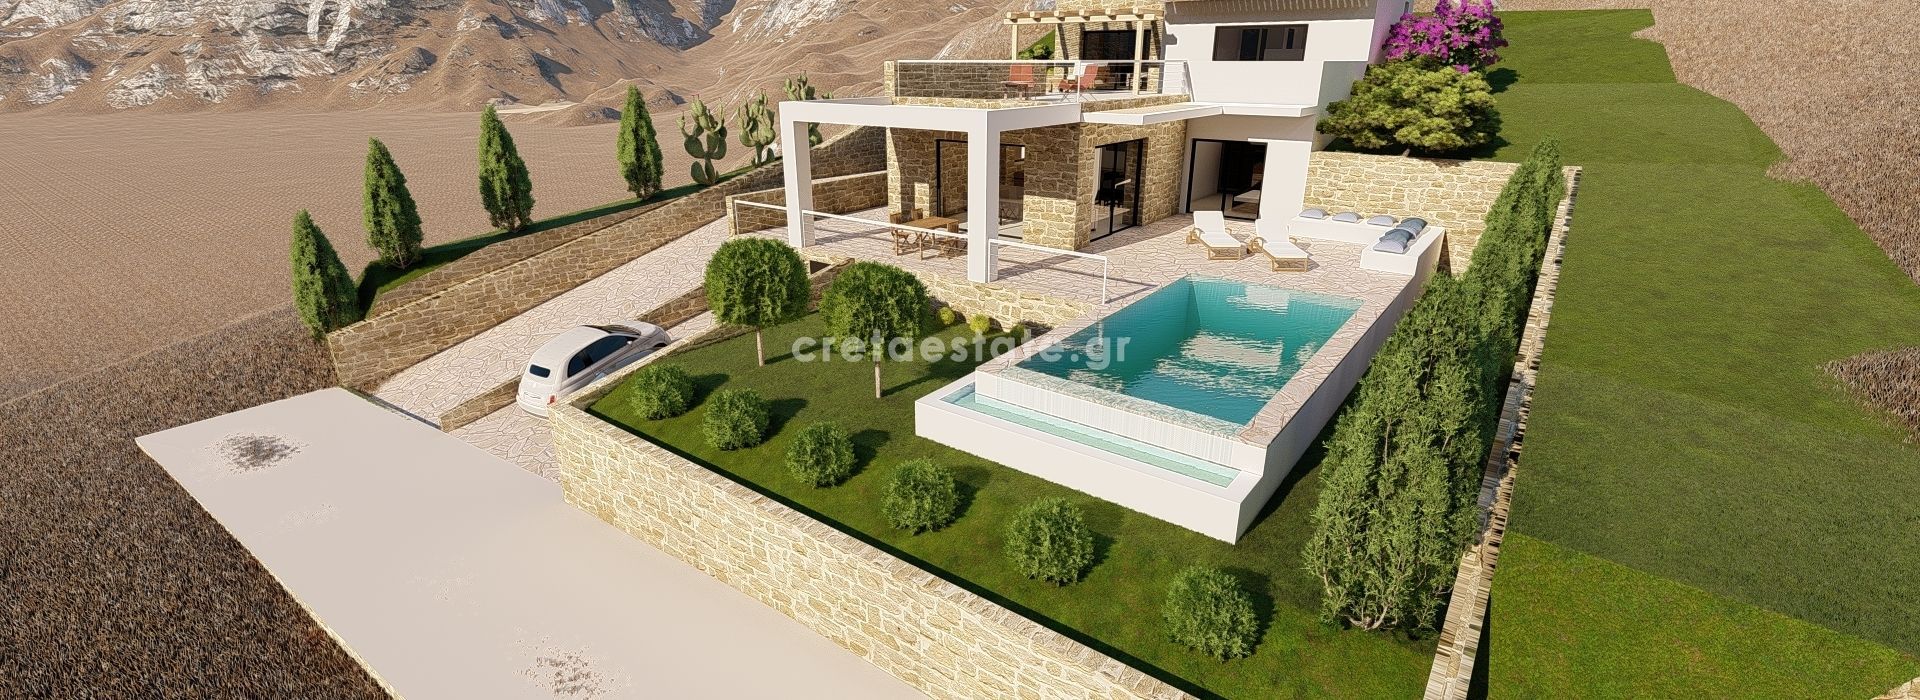 HOUSE 130 m² FOR SALE IN KAMILARI (PROJECT)